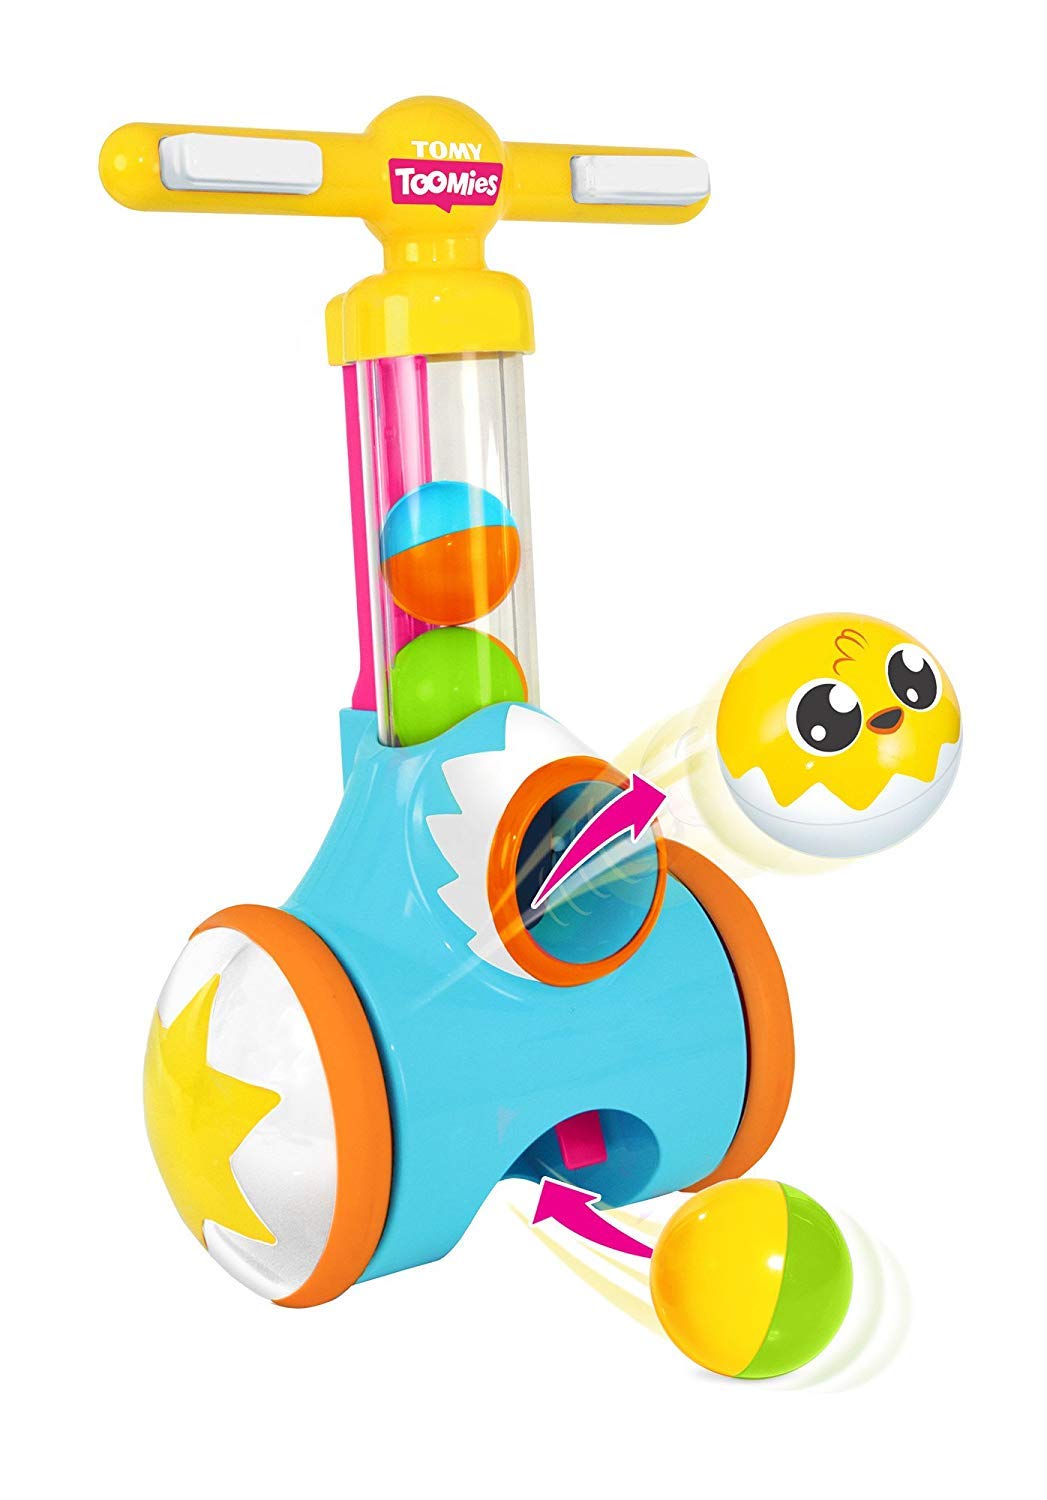 TOMY Toomies Pic & Pop Push Along Baby Toy | Toddler Ball Popper With Ball Launcher And Collector | Suitable For 18 Months, 2 & 3 Year Old Boys & Girls ,Multicoloured,E71161